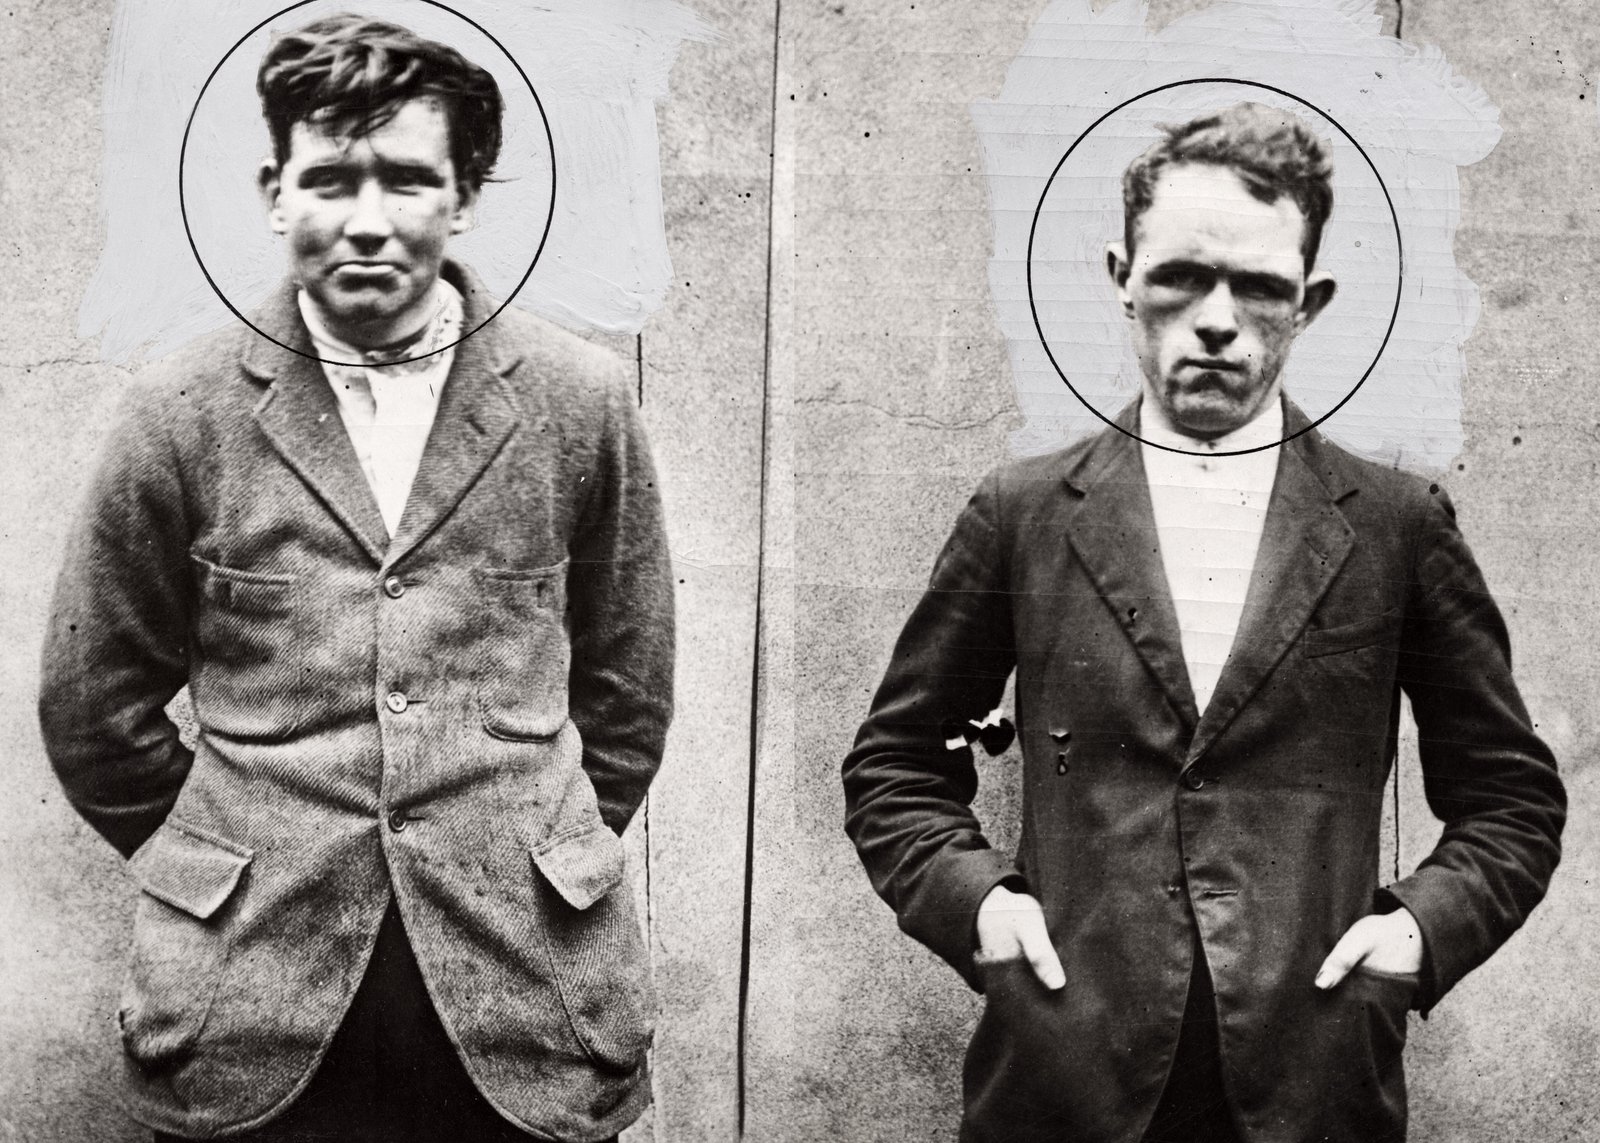 Image - Reggie Dunne (left) and Joe O'Sullivan (right) photographed in prison shortly before their execution (Credit: Spaarnestad Photo)